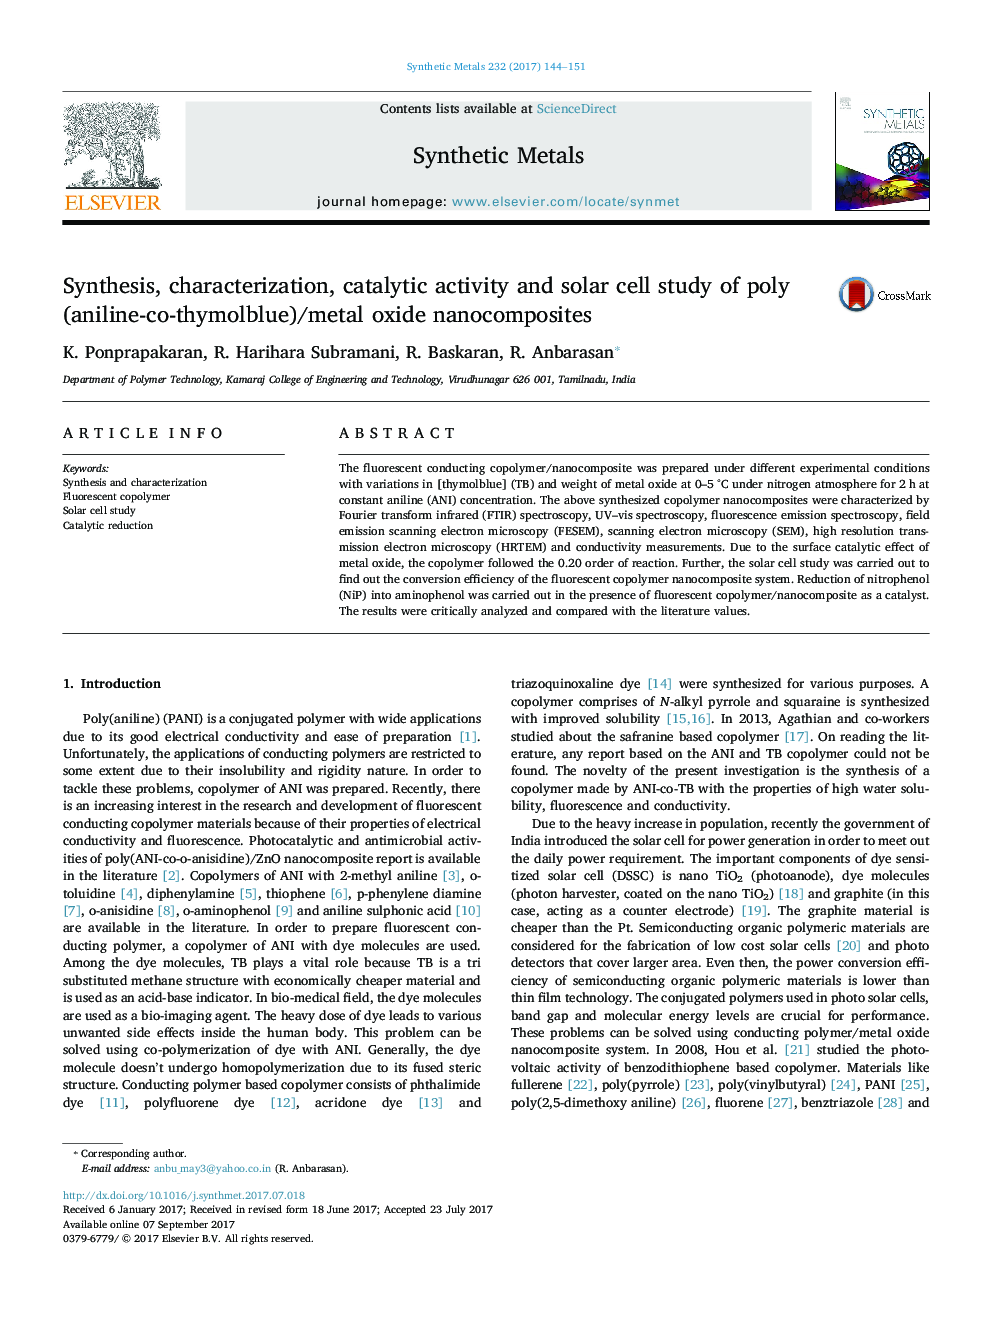 Synthesis, characterization, catalytic activity and solar cell study of poly(aniline-co-thymolblue)/metal oxide nanocomposites